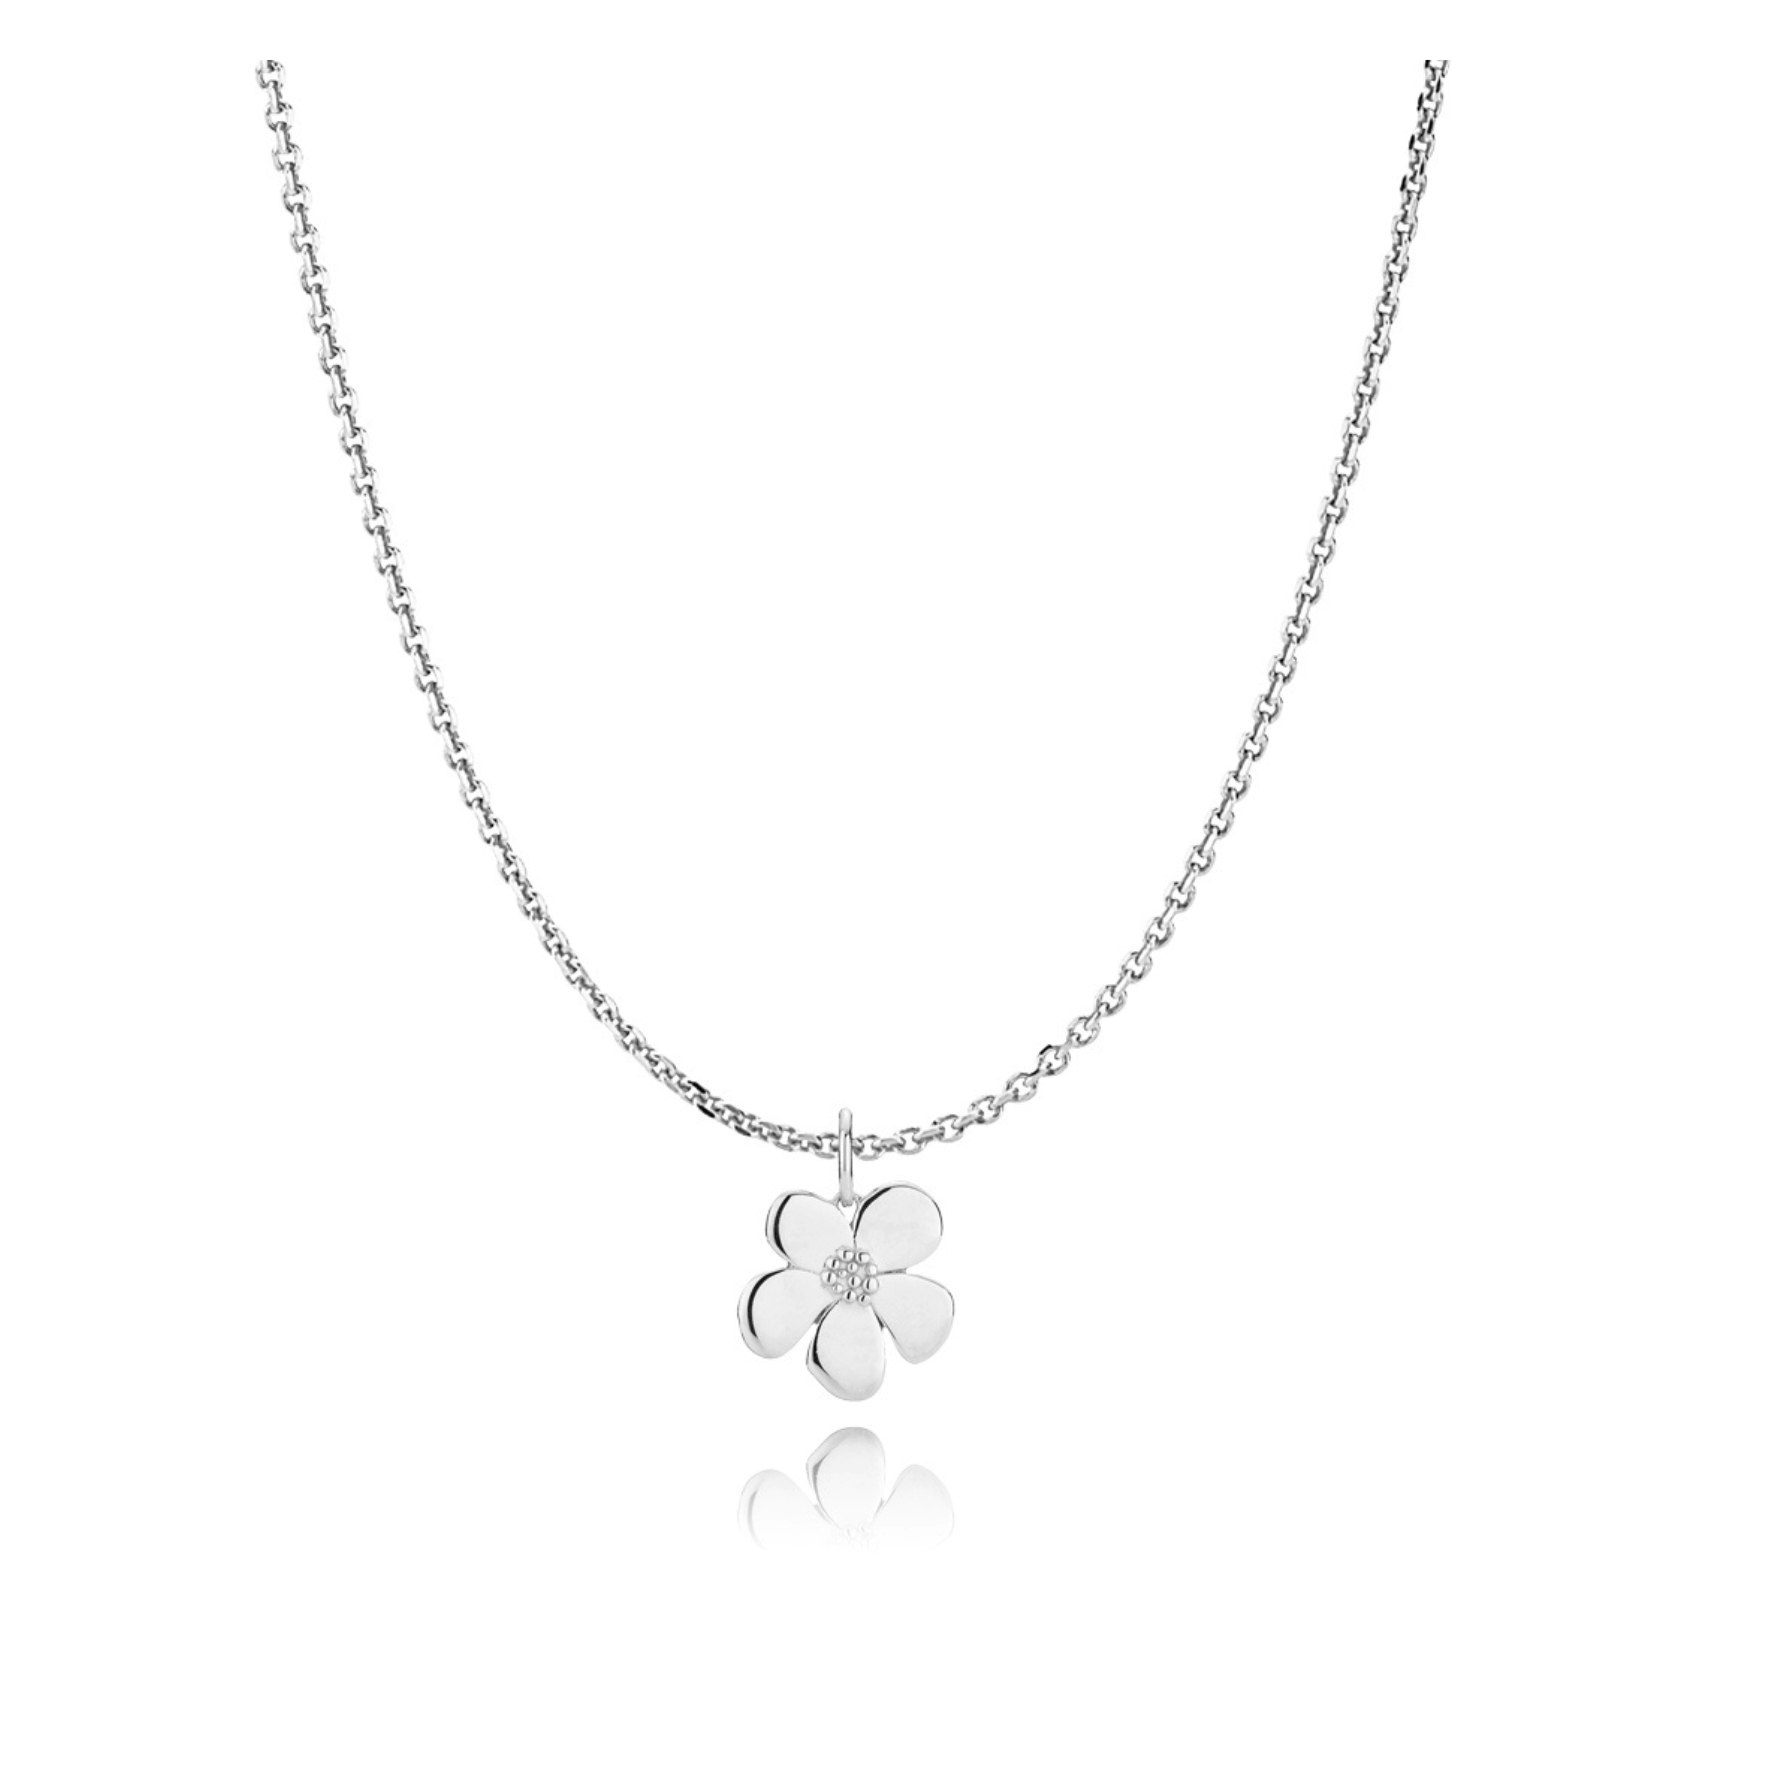 Pansy Necklace from Izabel Camille in Silver Sterling 925